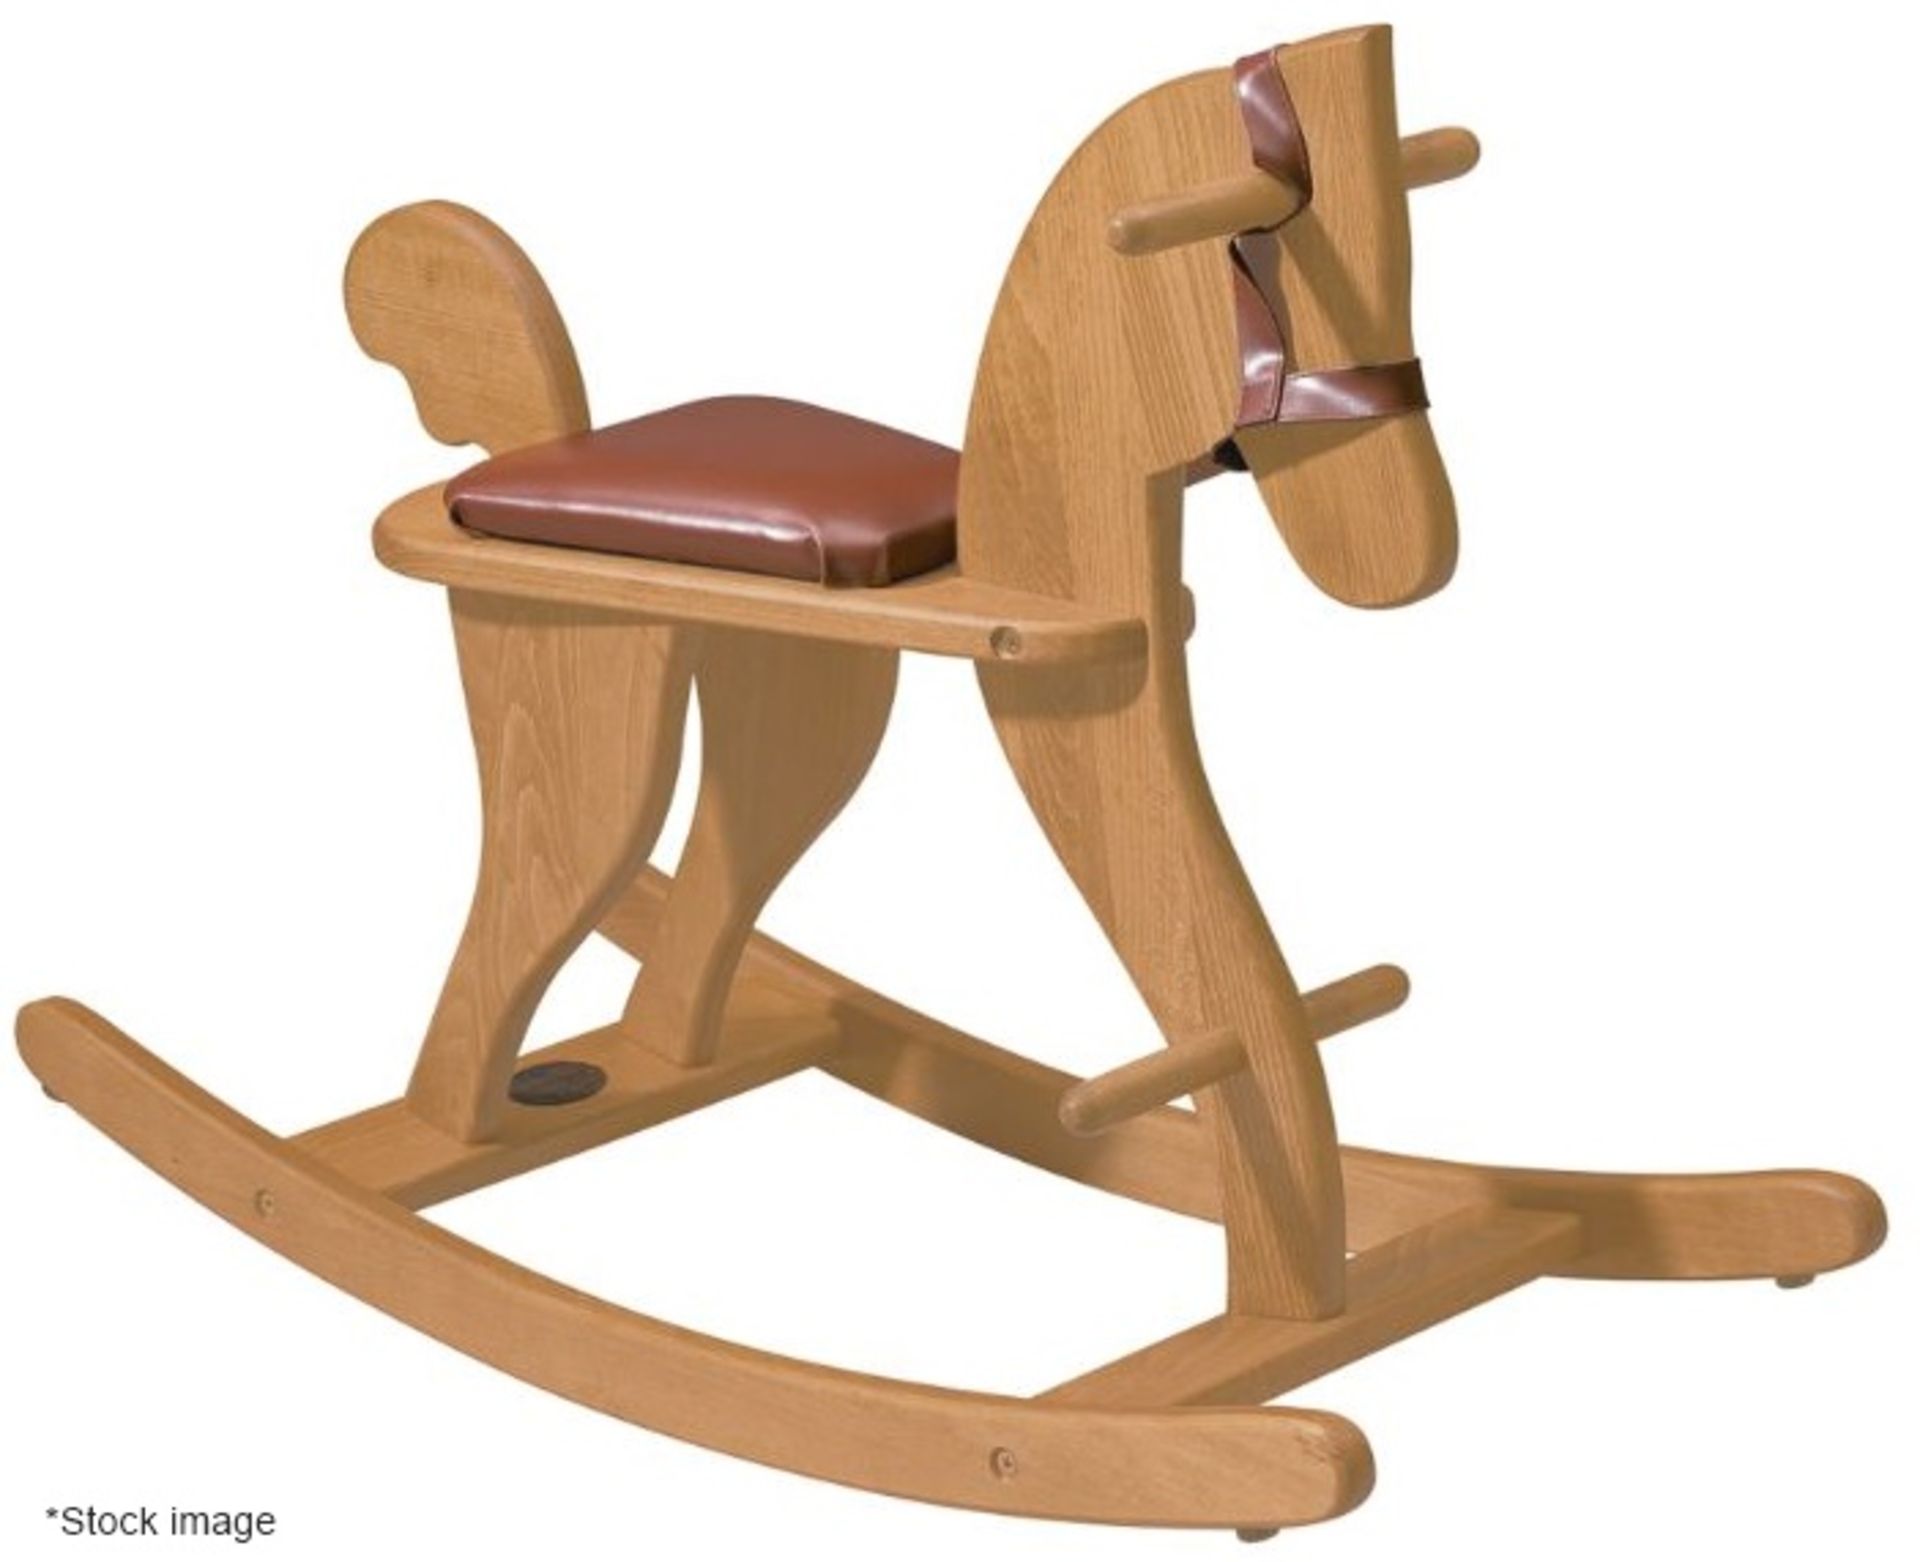 1 x MOULIN ROTY Luxury Wooden Rocking Horse - Original Price £129.00 - Unused Boxed Stock - Ref: